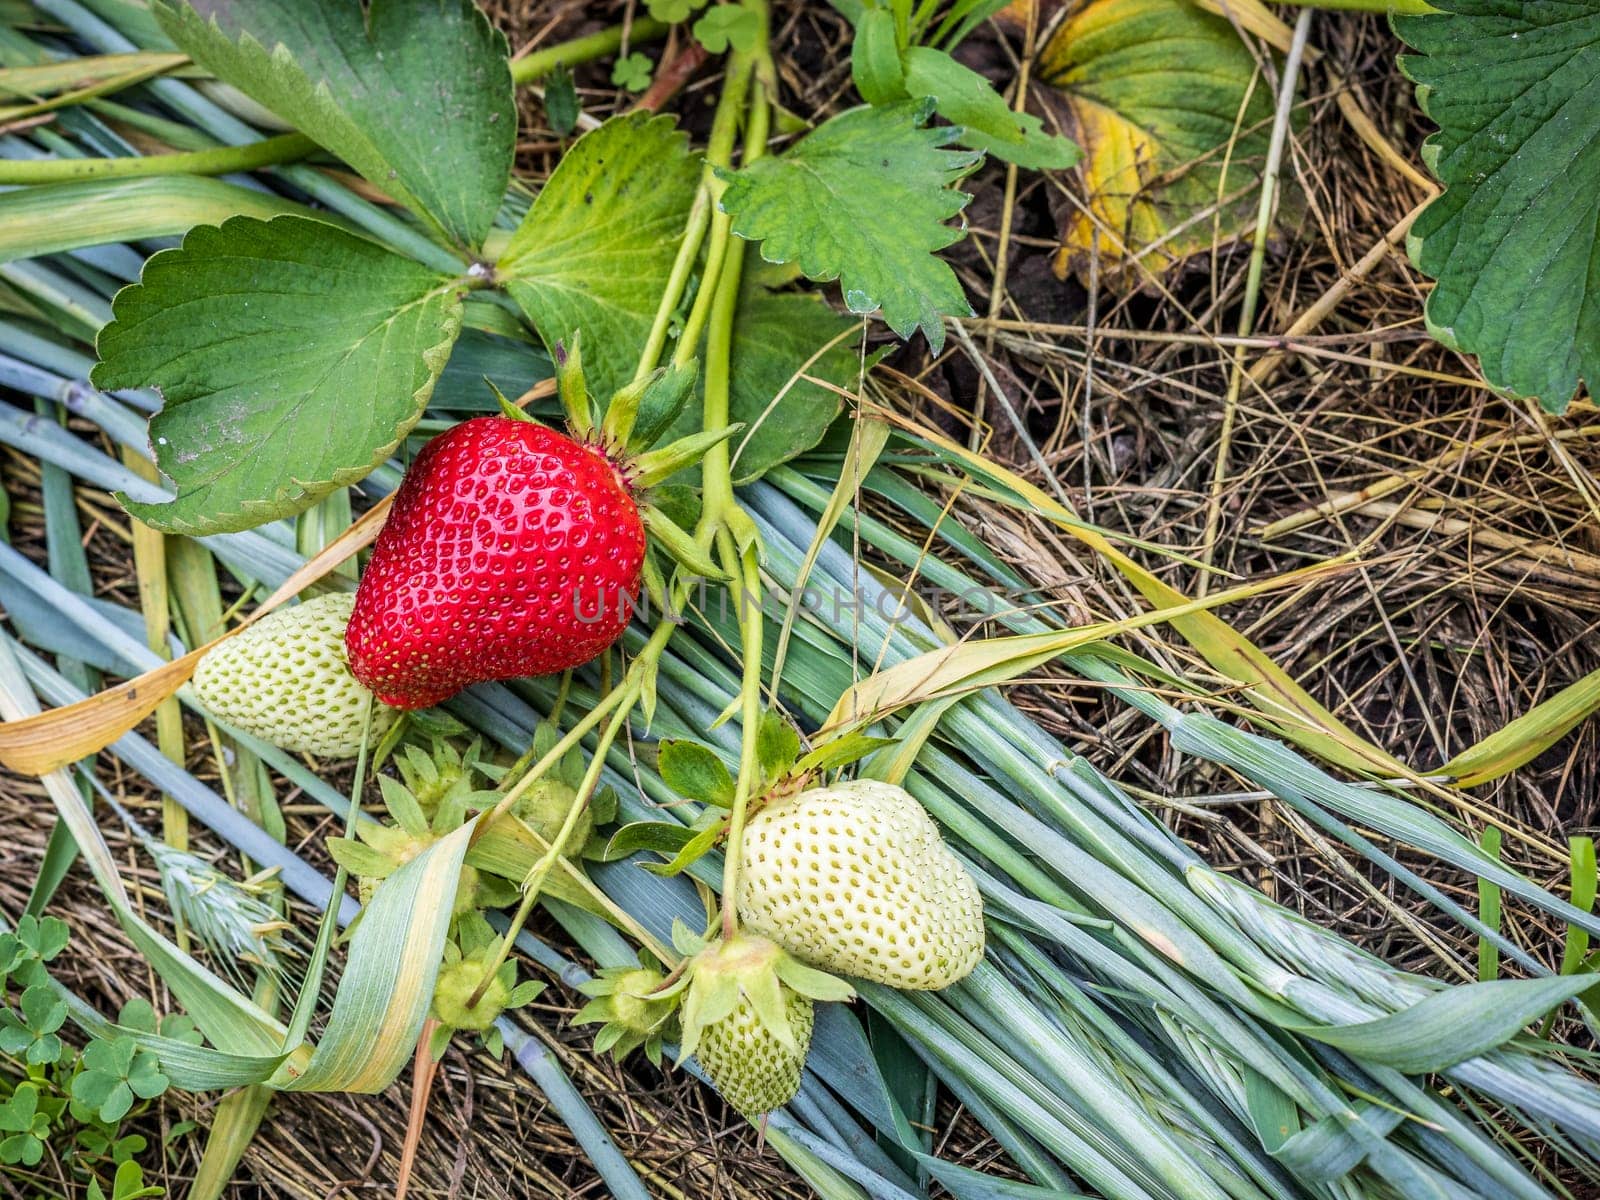 Strawberry plant. Strawberry bush in the garden with ripe and unripe berries laying on straw. Top view.